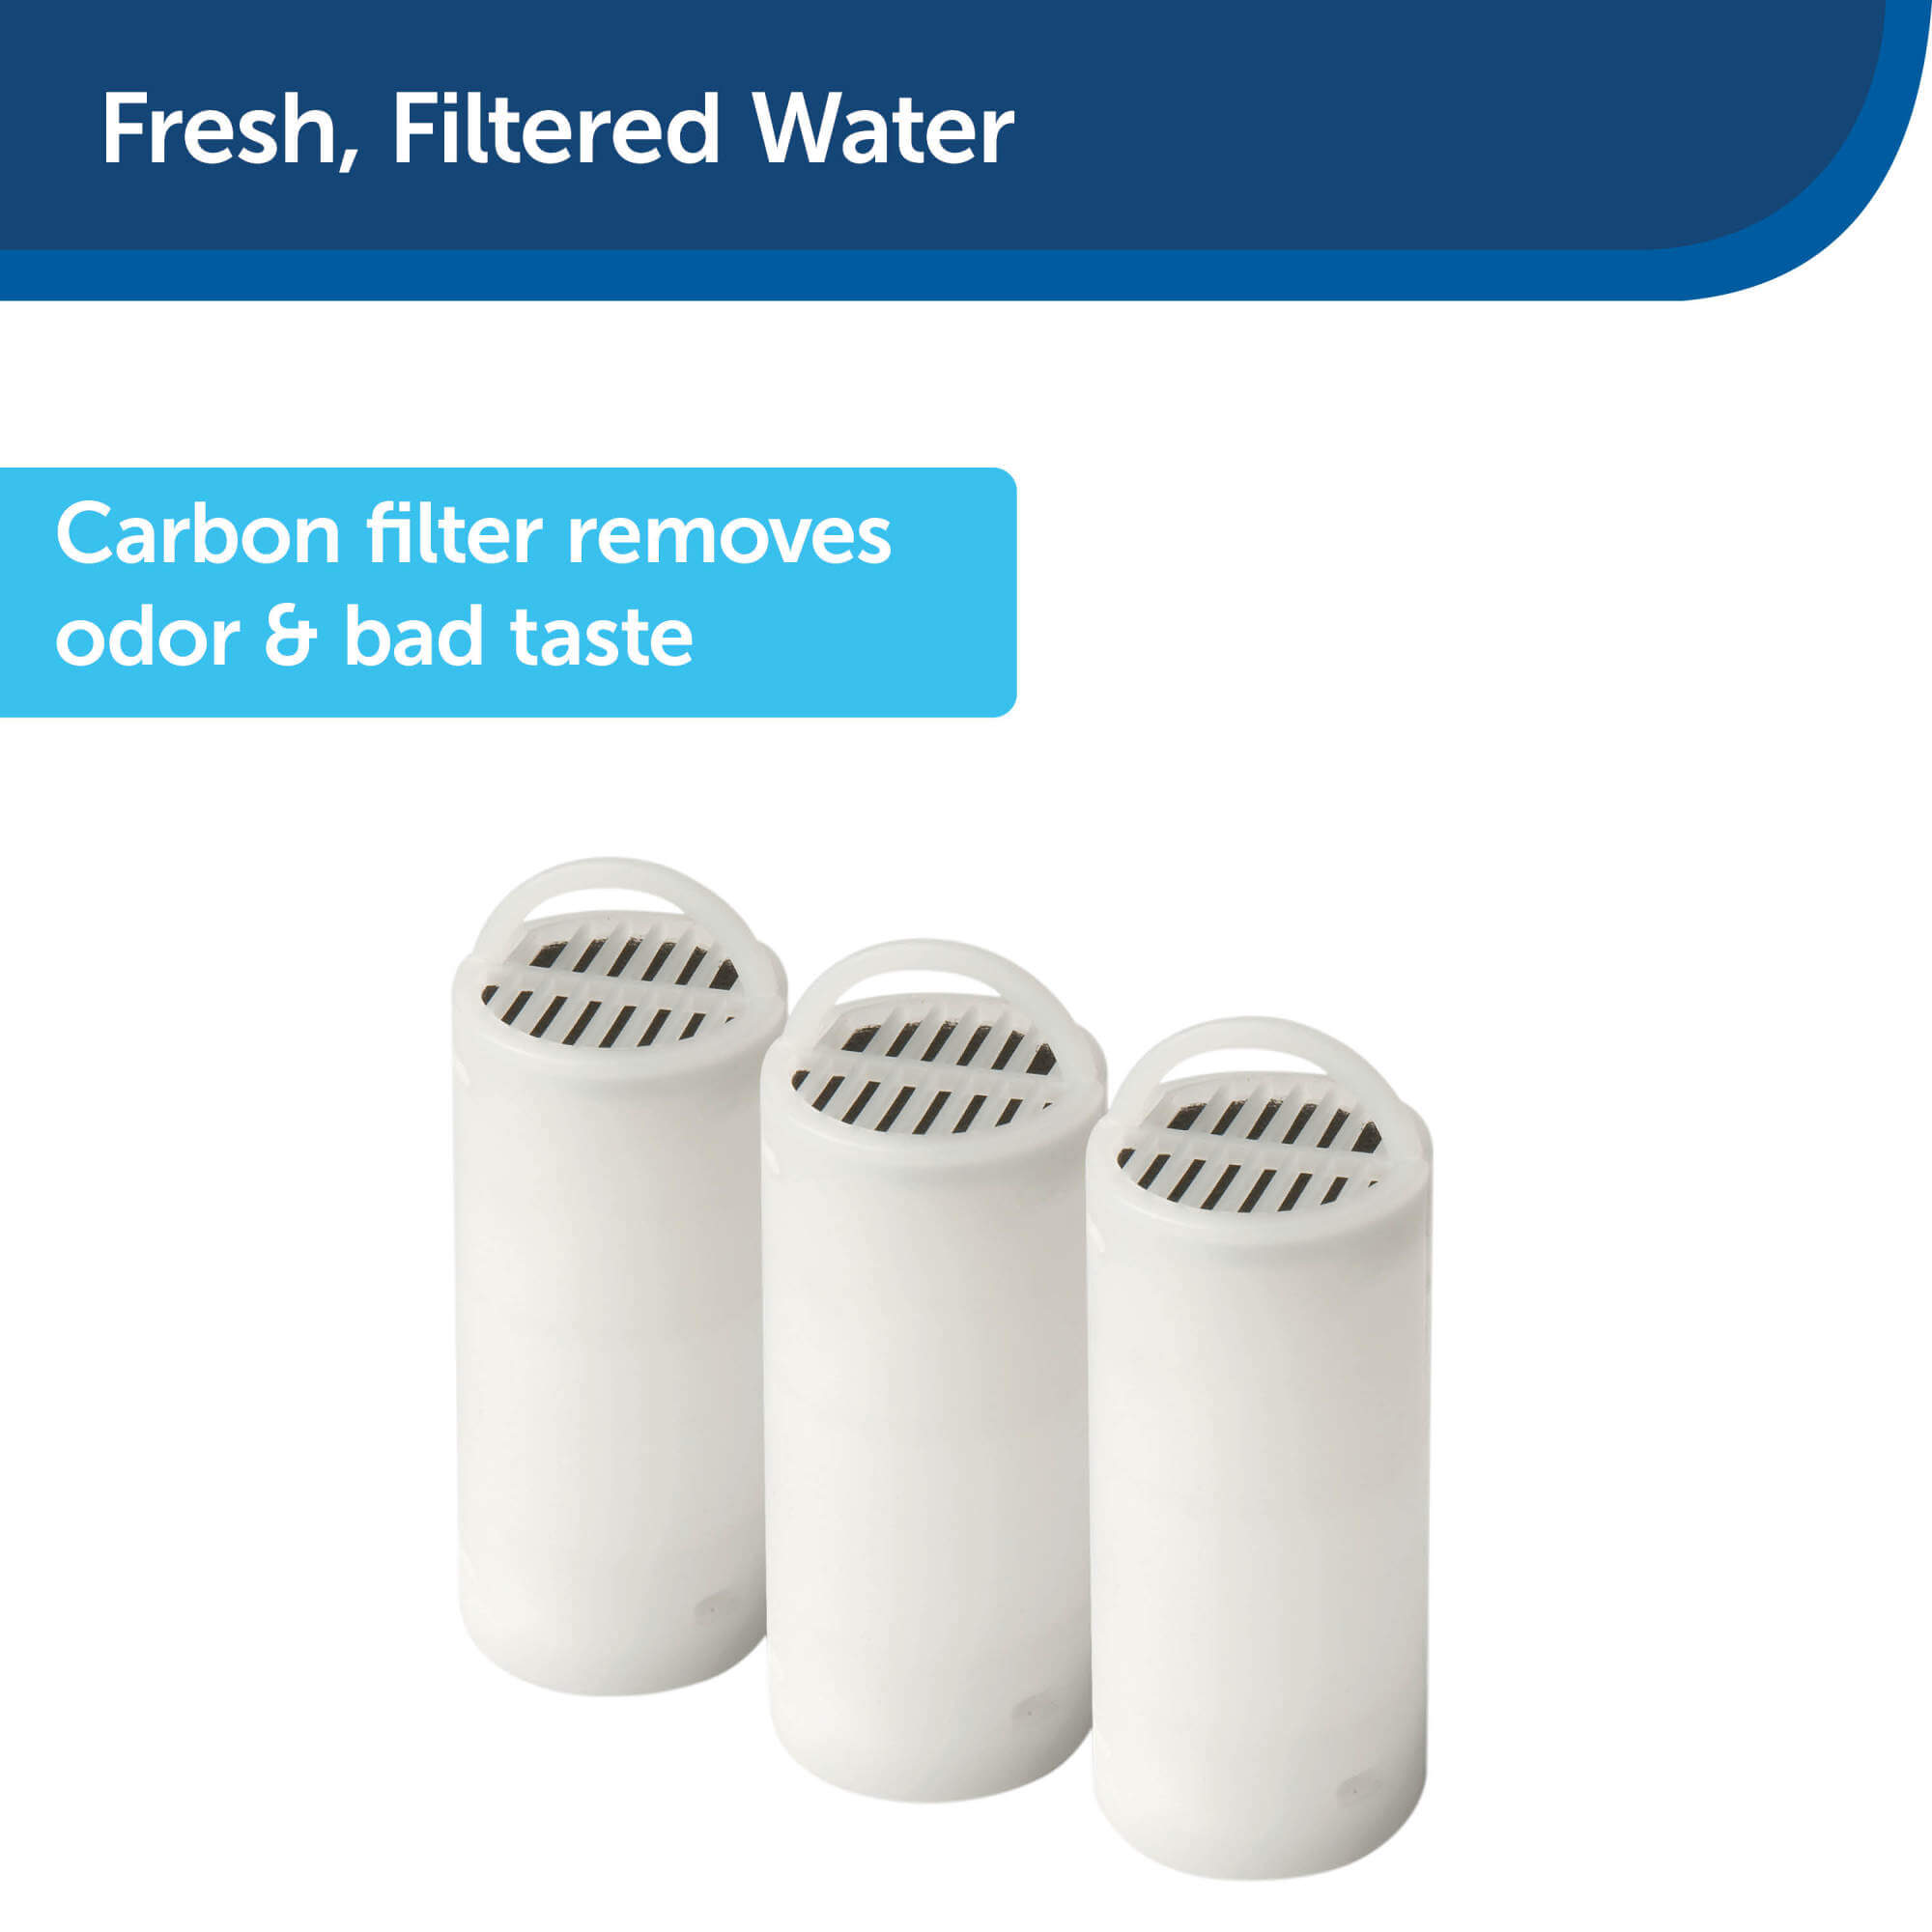 Drinkwell Fresh, filtered water